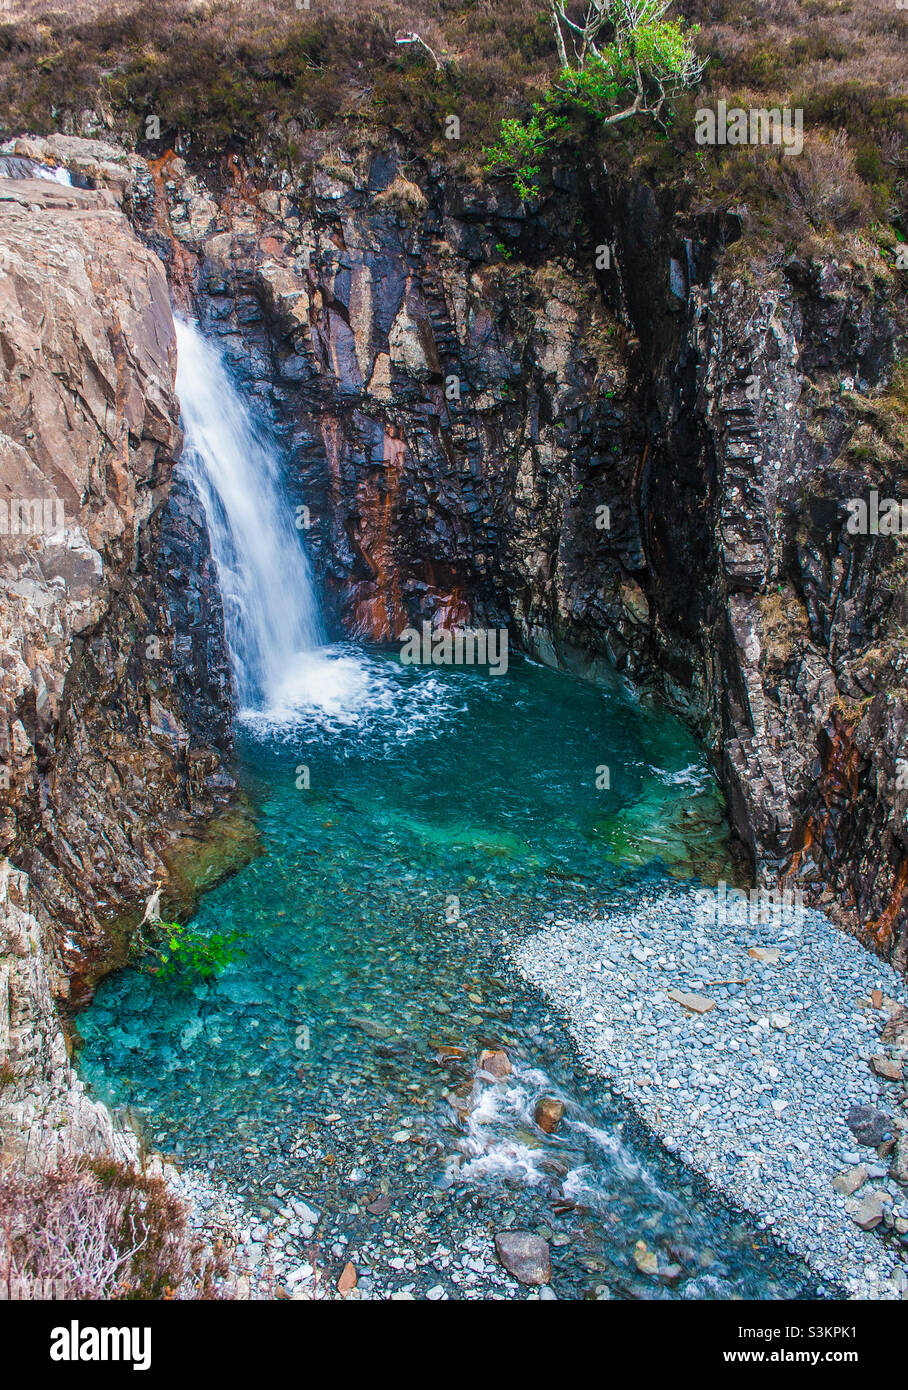 Cascades pour into the blue water of the fairy pools on the Isle of Skye, Scotland Stock Photo